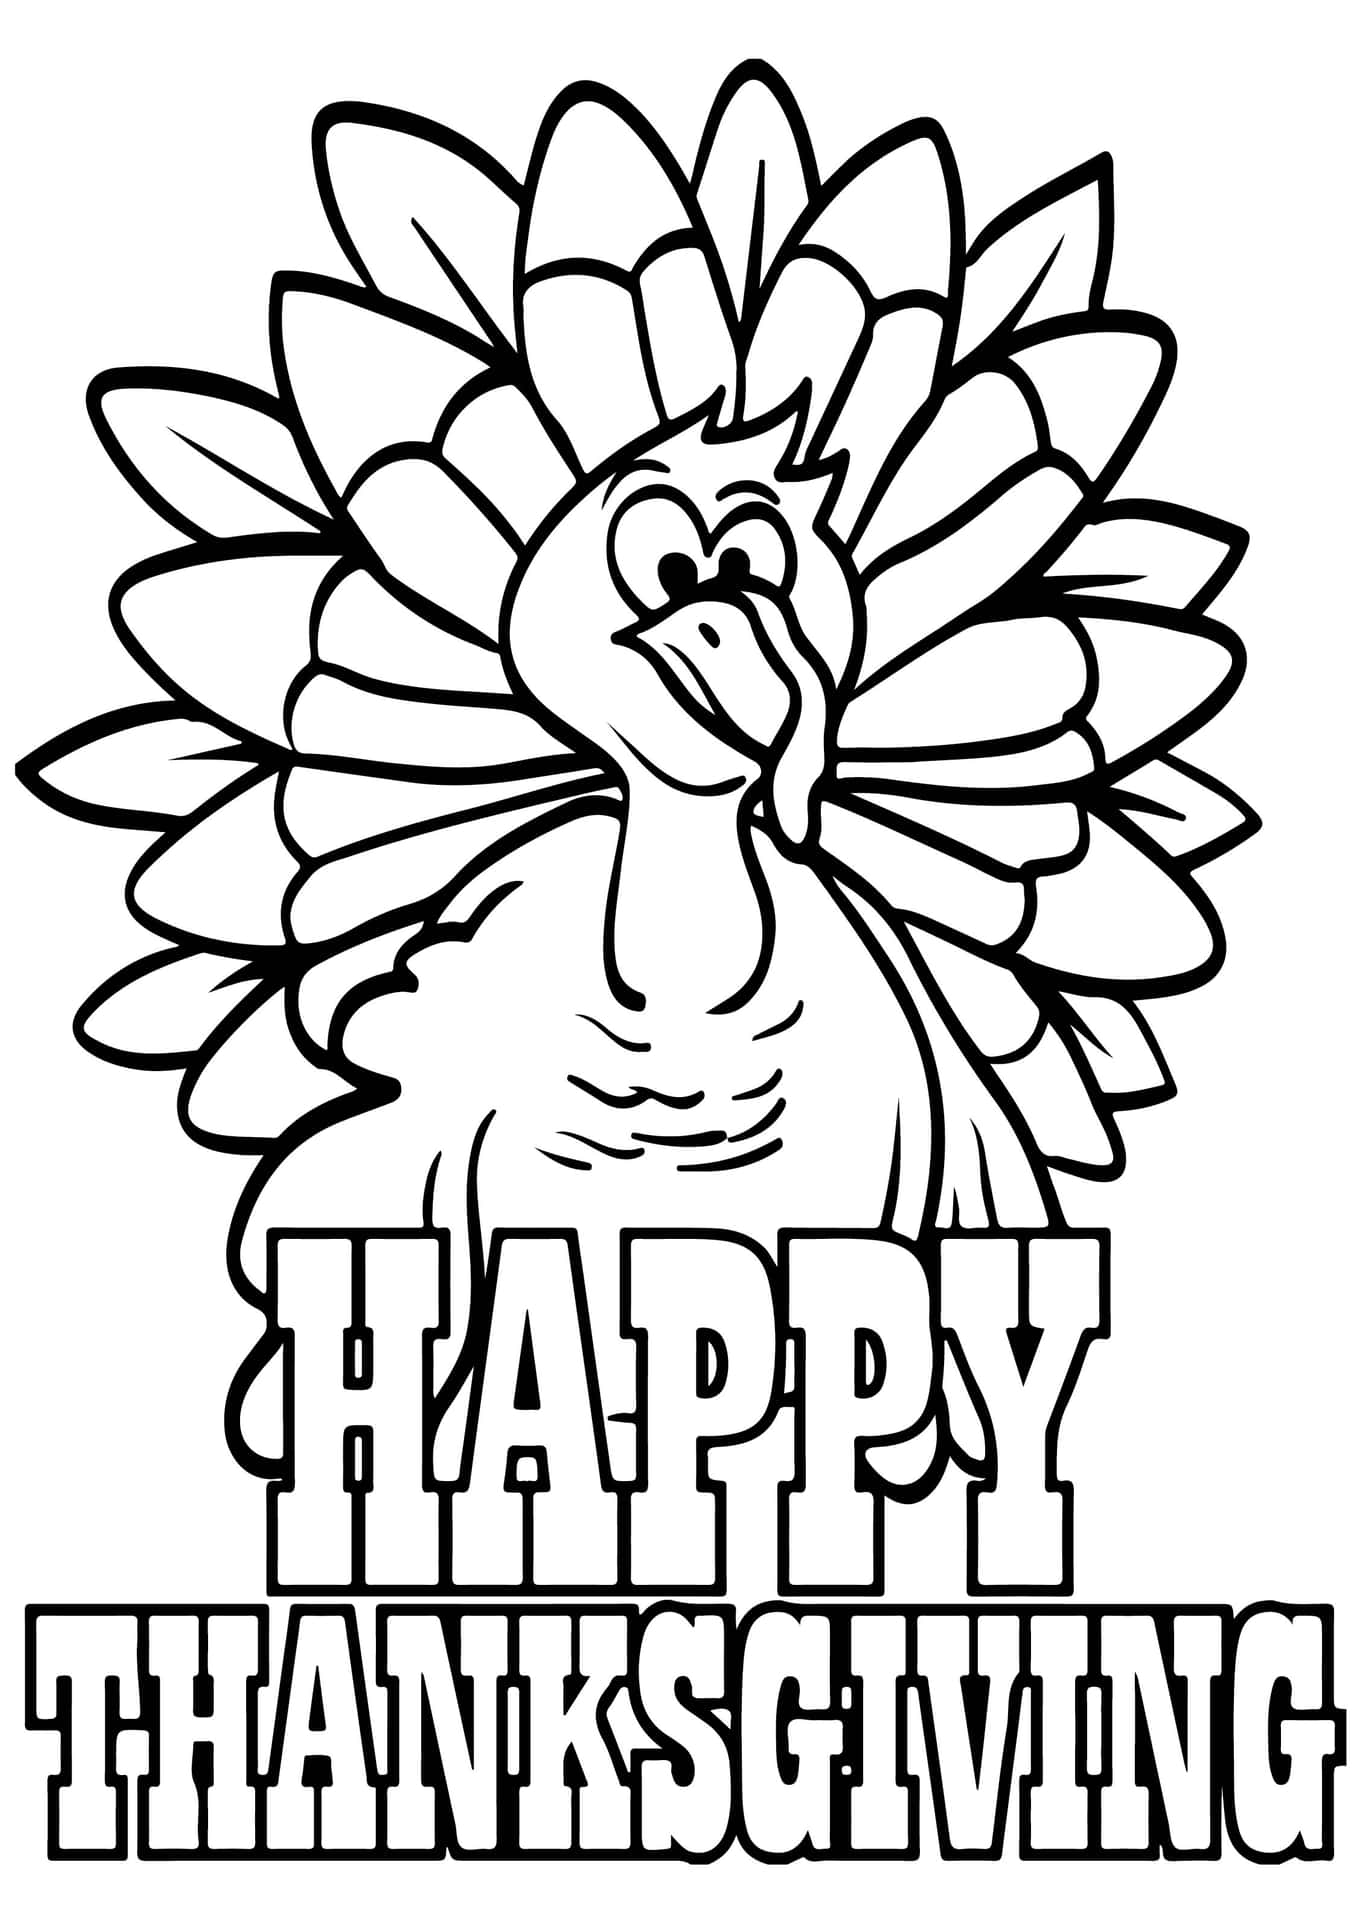 Give thanks - Craft a colorful Thanksgiving with this printable coloring page